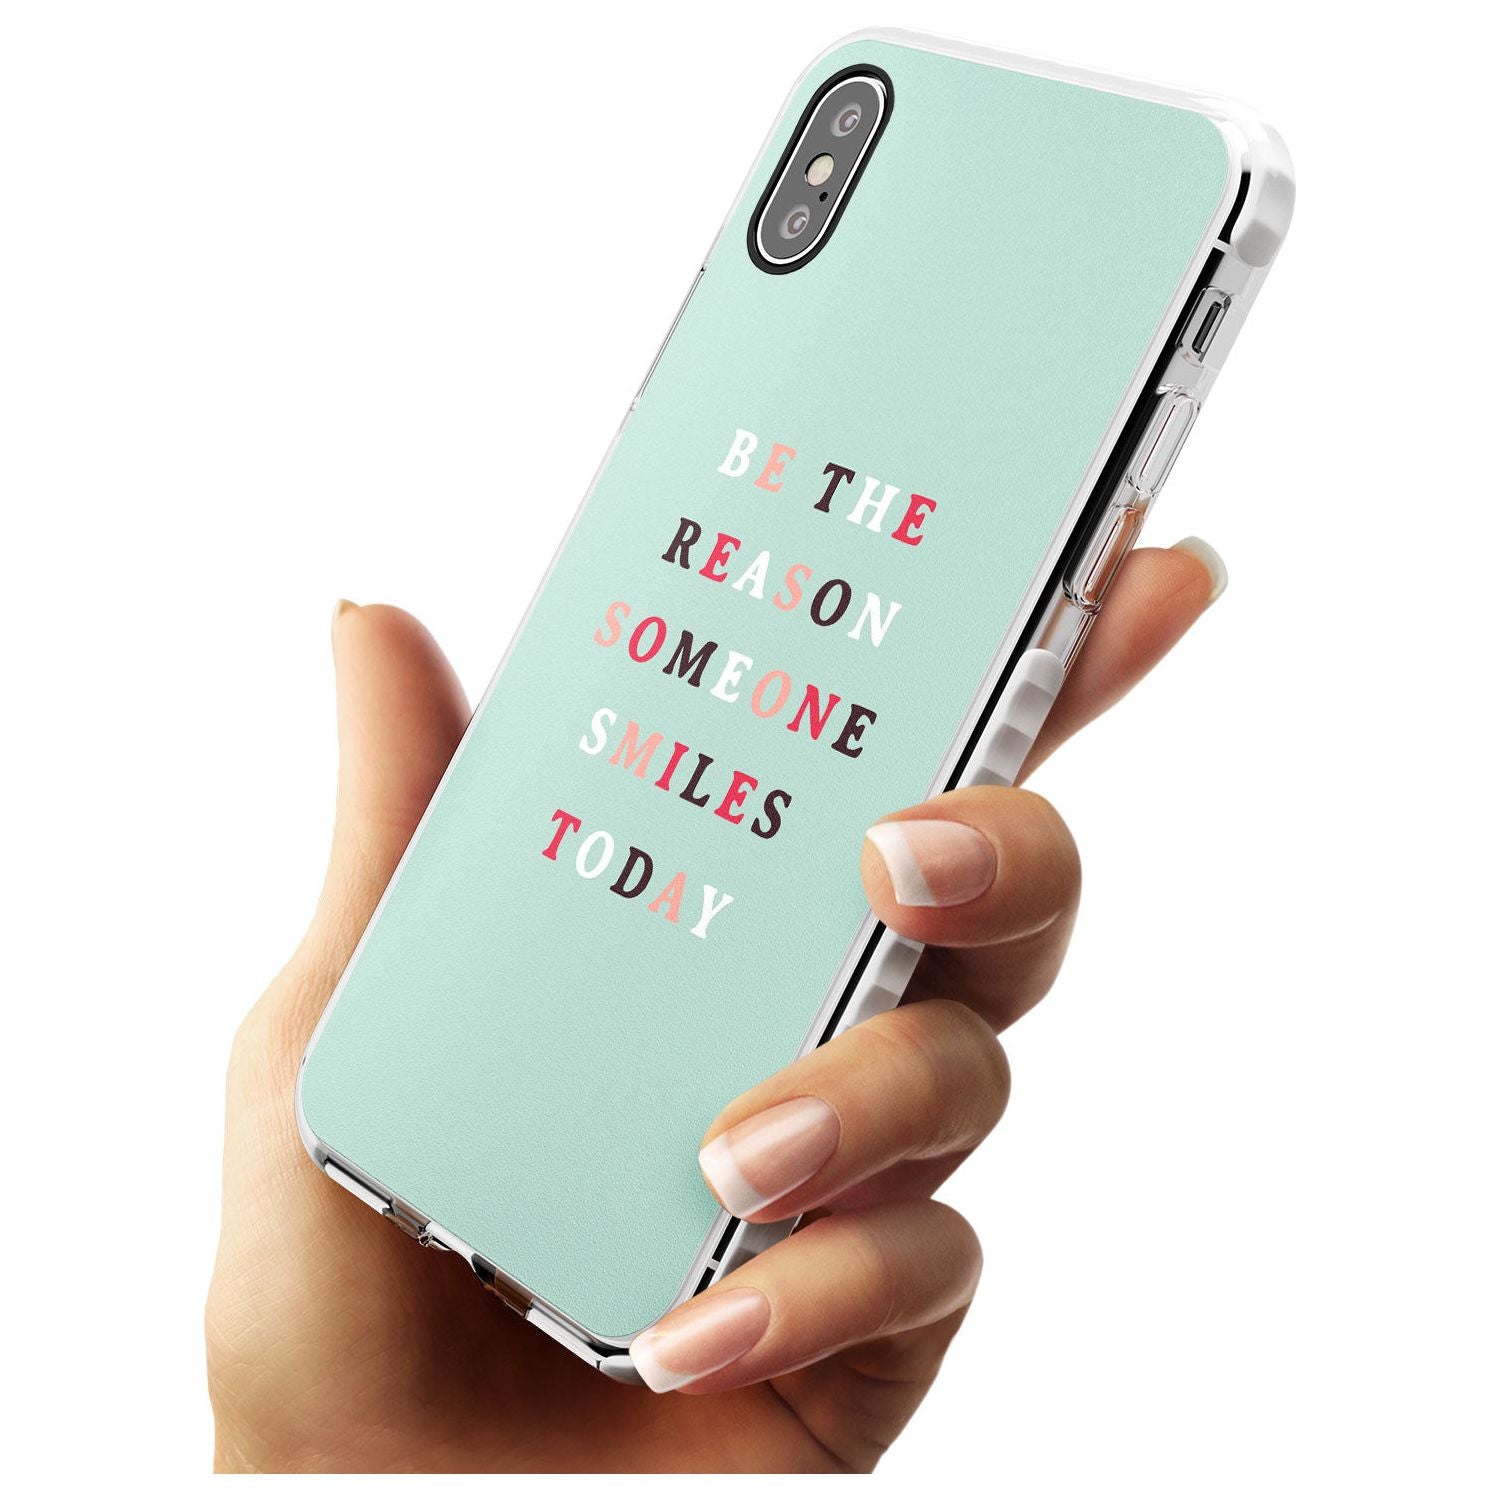 Be the reason someone smiles Impact Phone Case for iPhone X XS Max XR